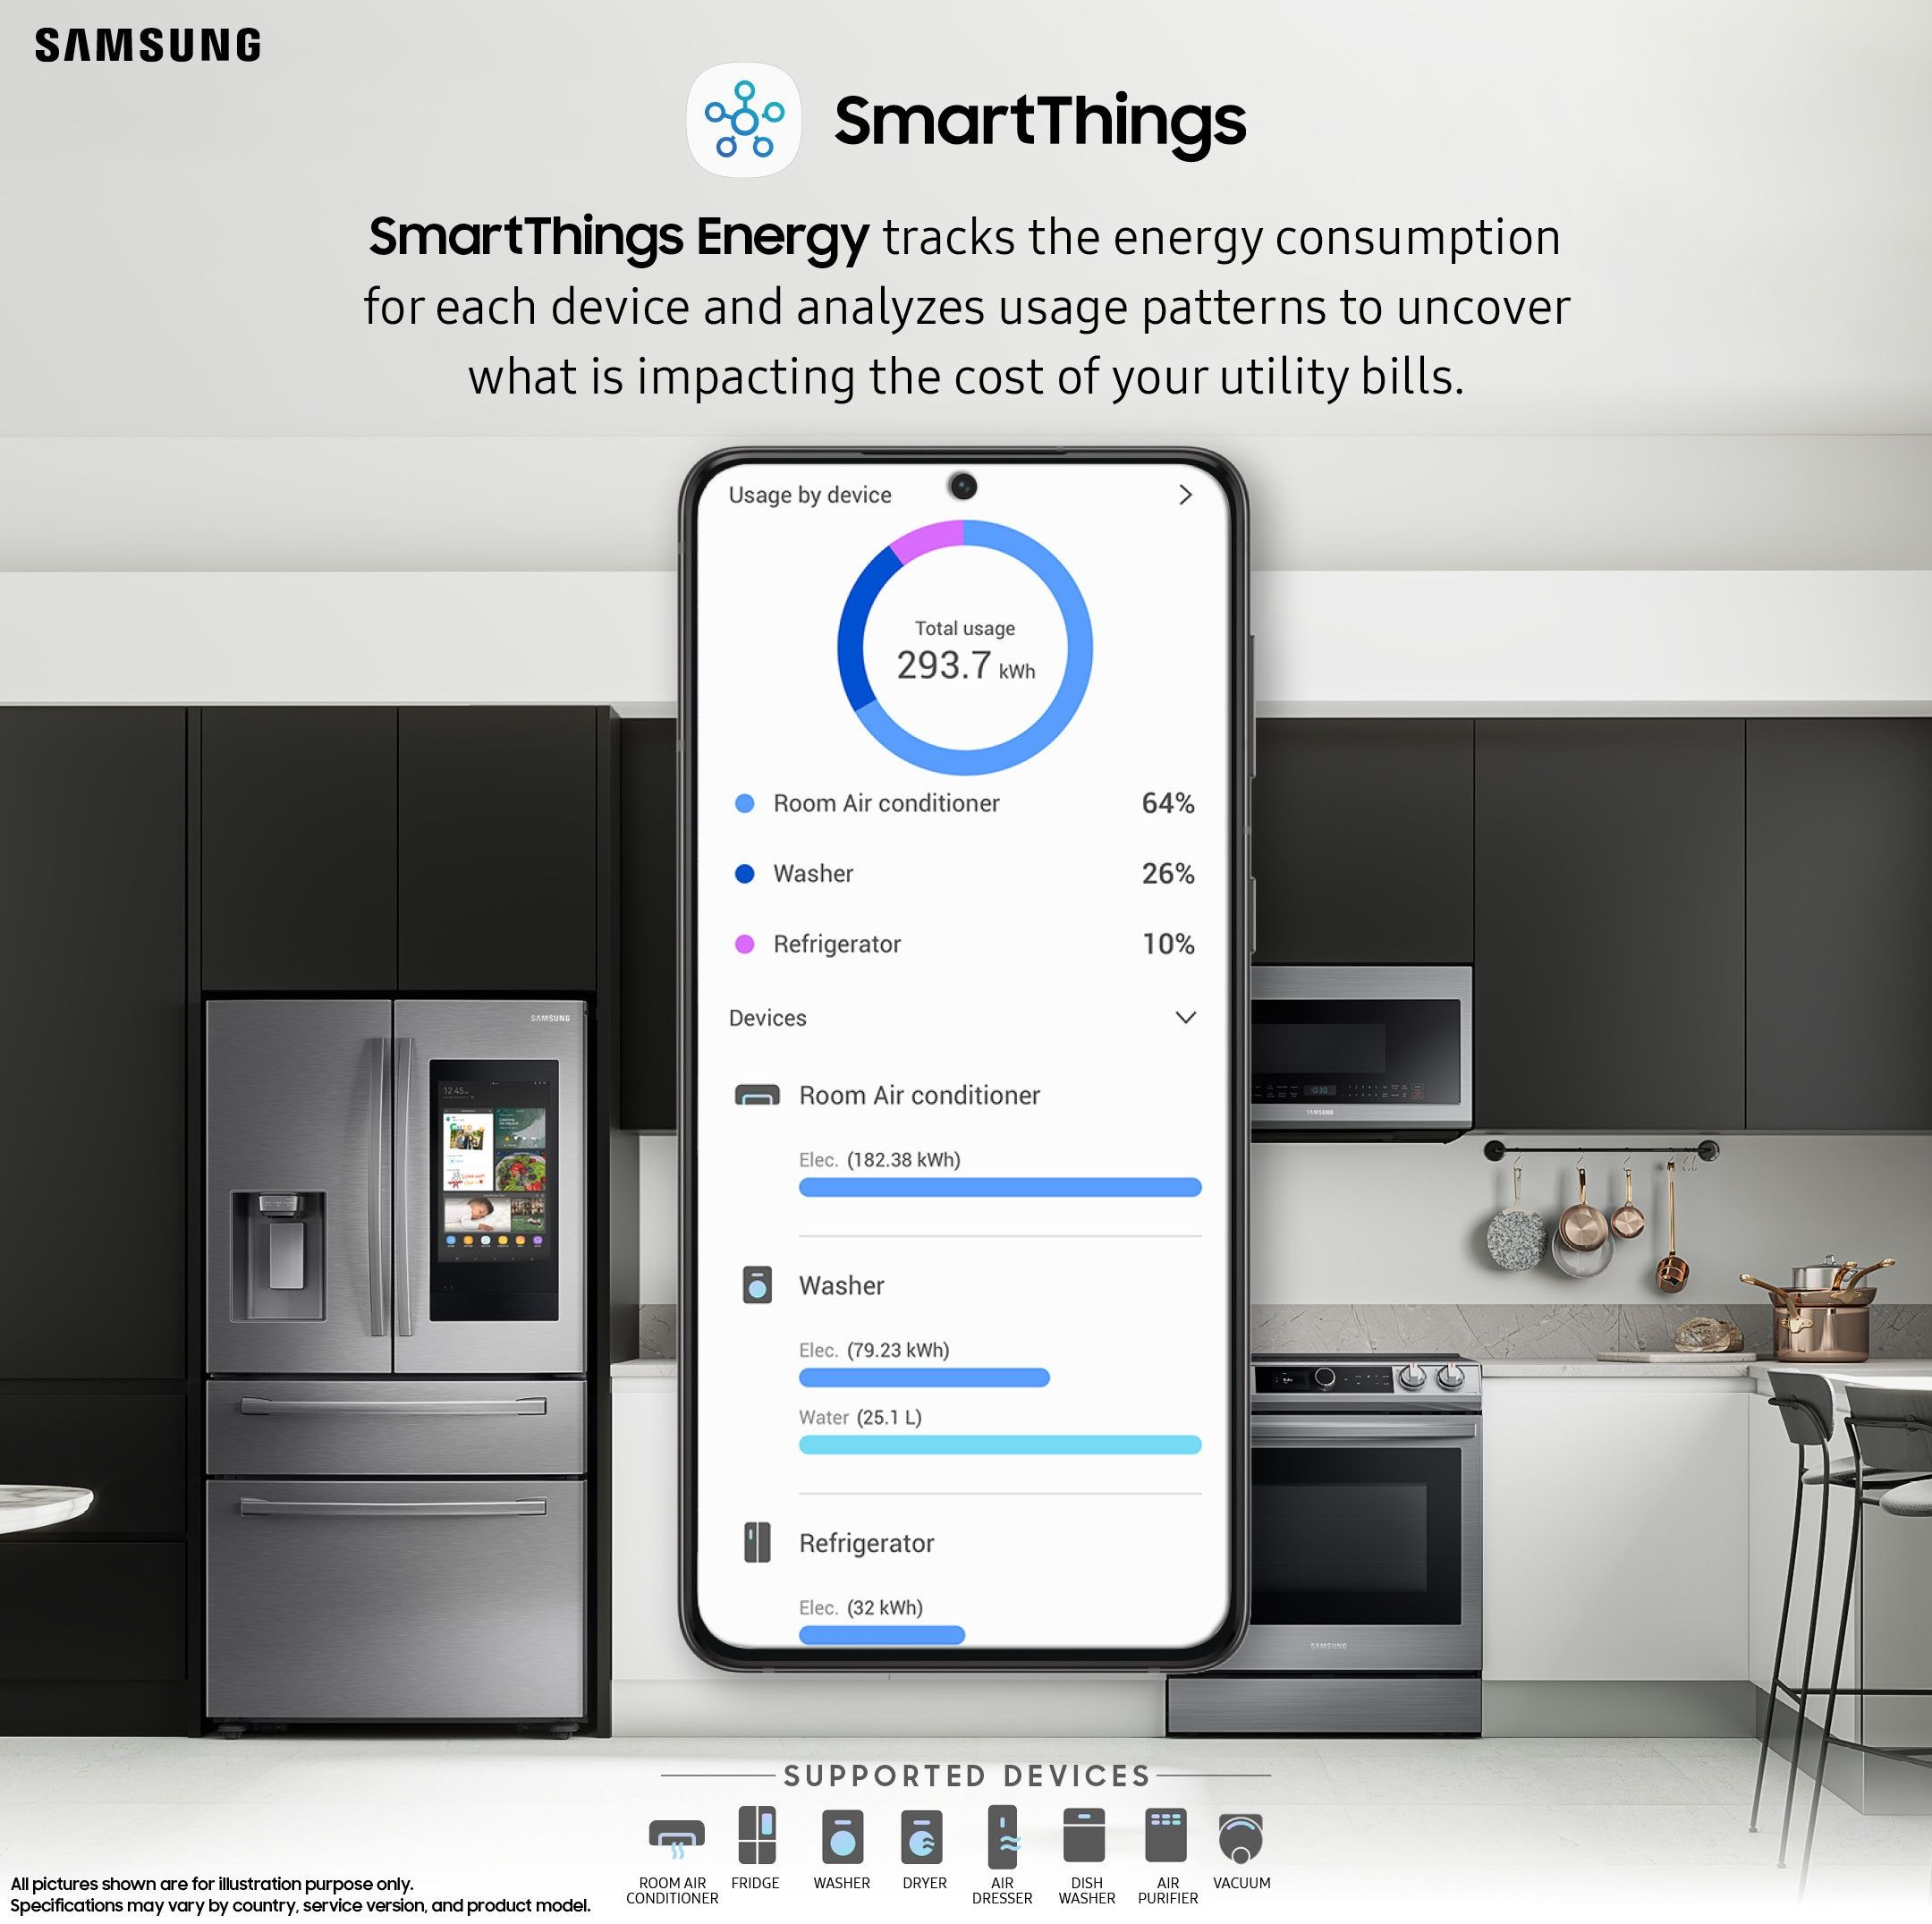 samsung smartthings app is pictured on an android phone showing the monitoring capabilities built into the app, which shows the devices using the most energy in your home at any time